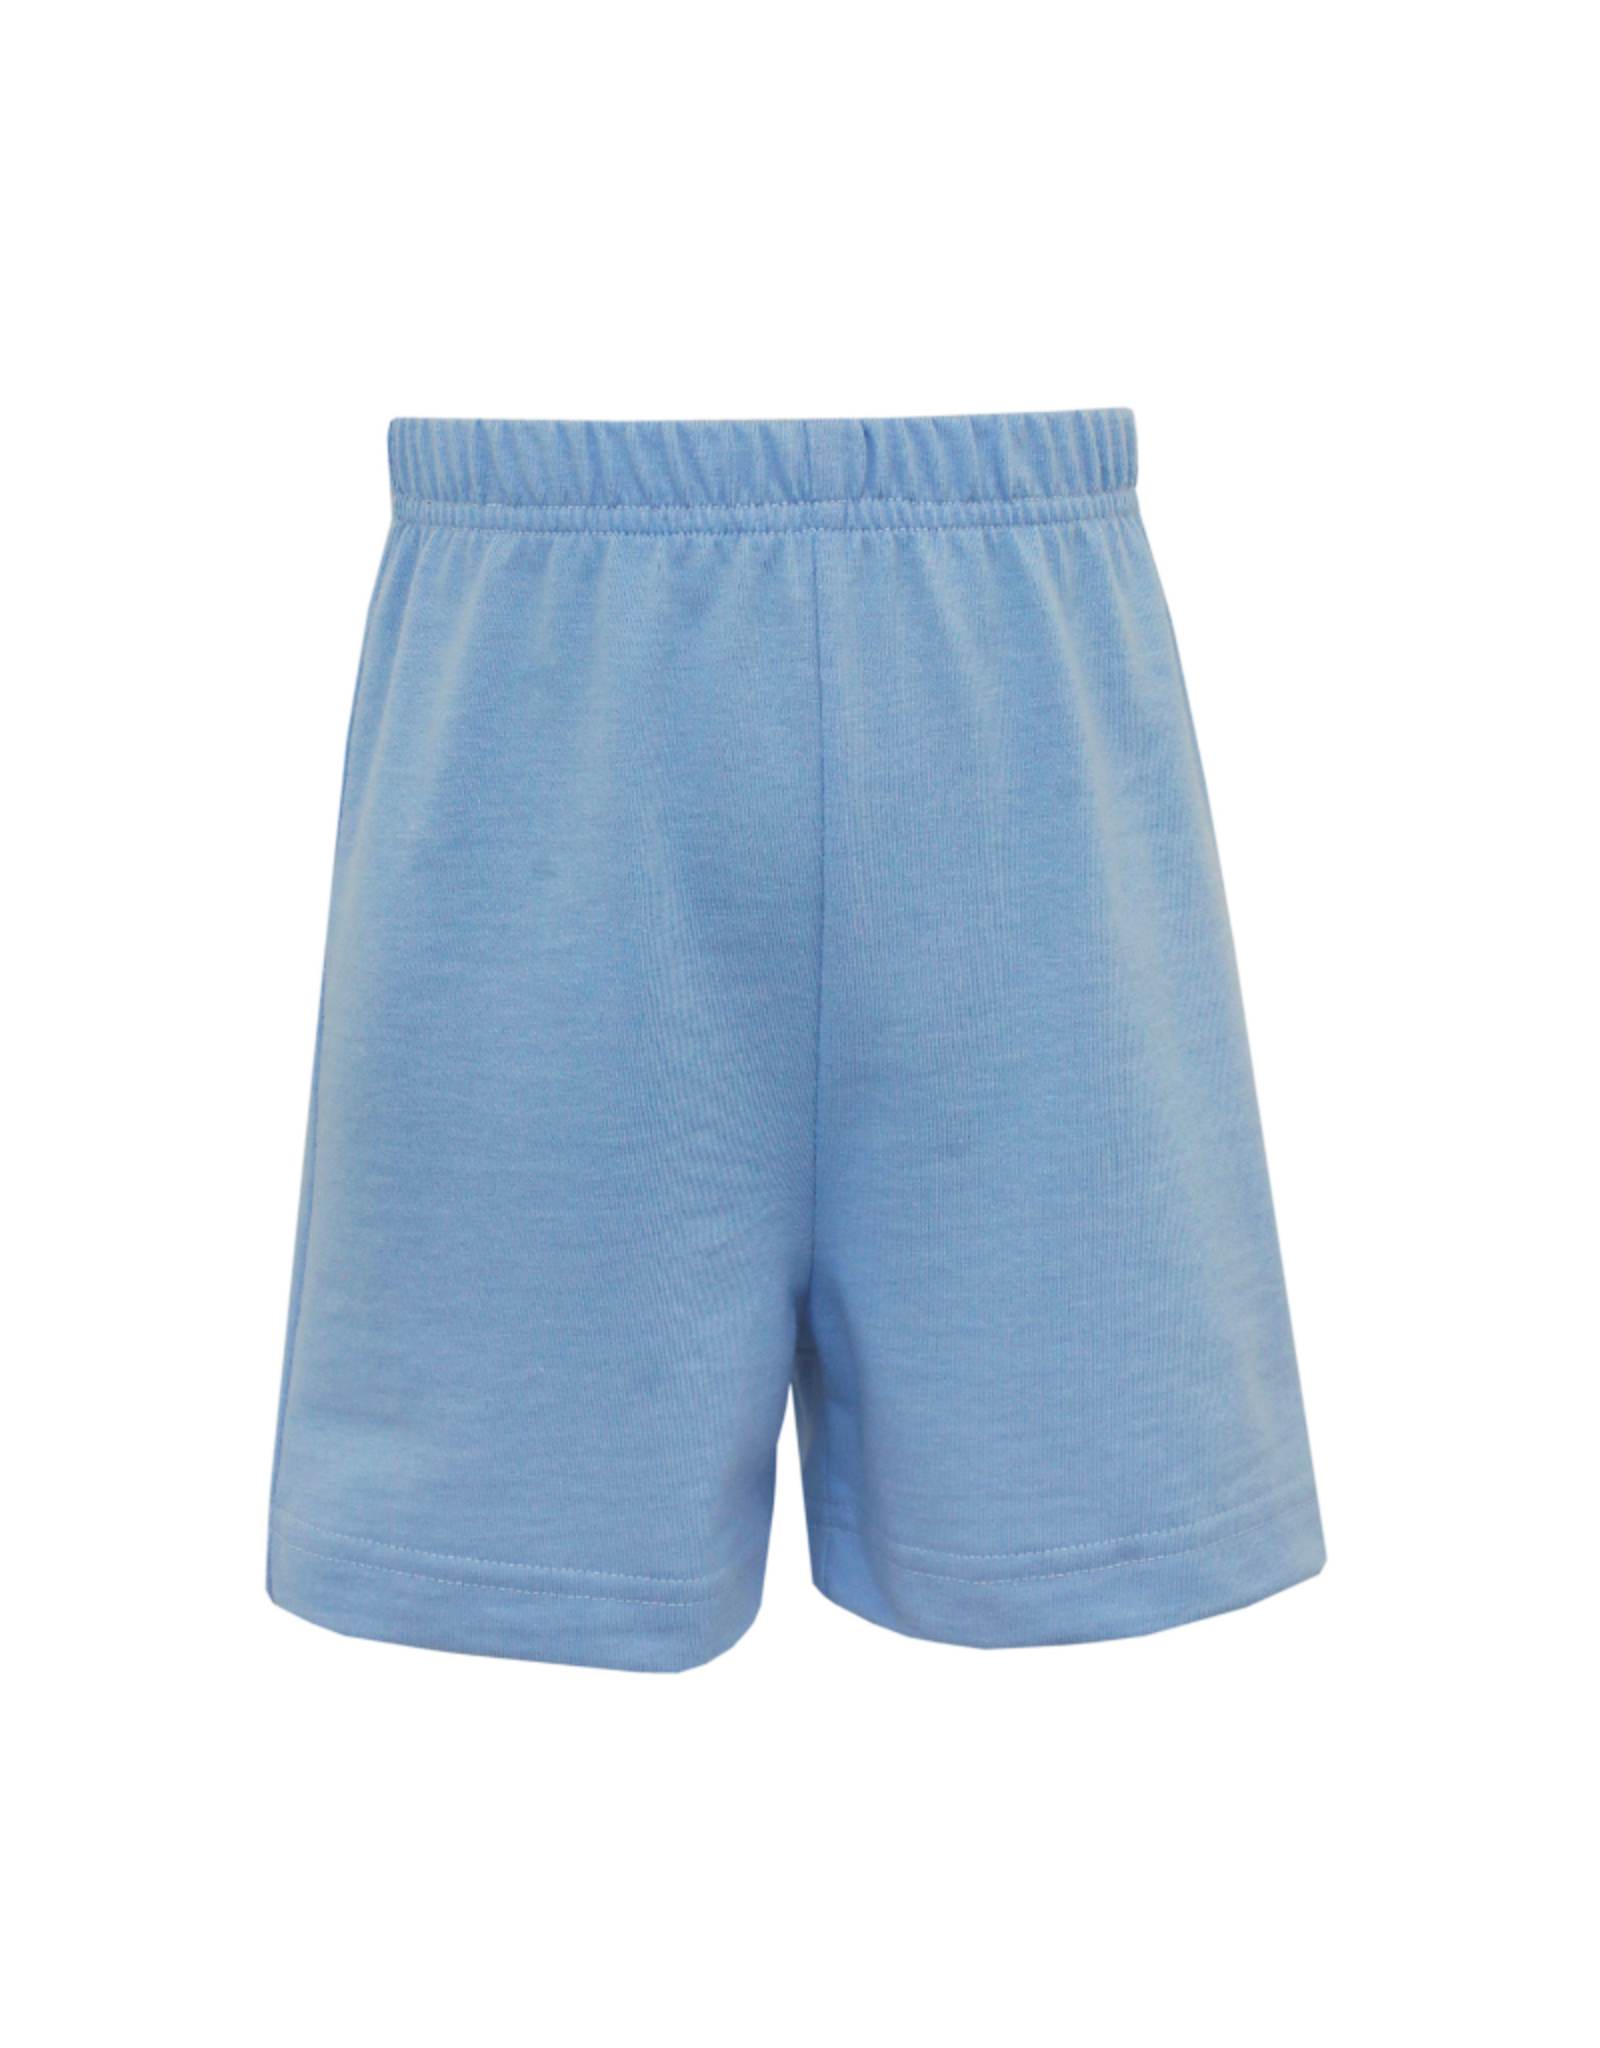 Claire and Charlie Light Blue Knit Shorts